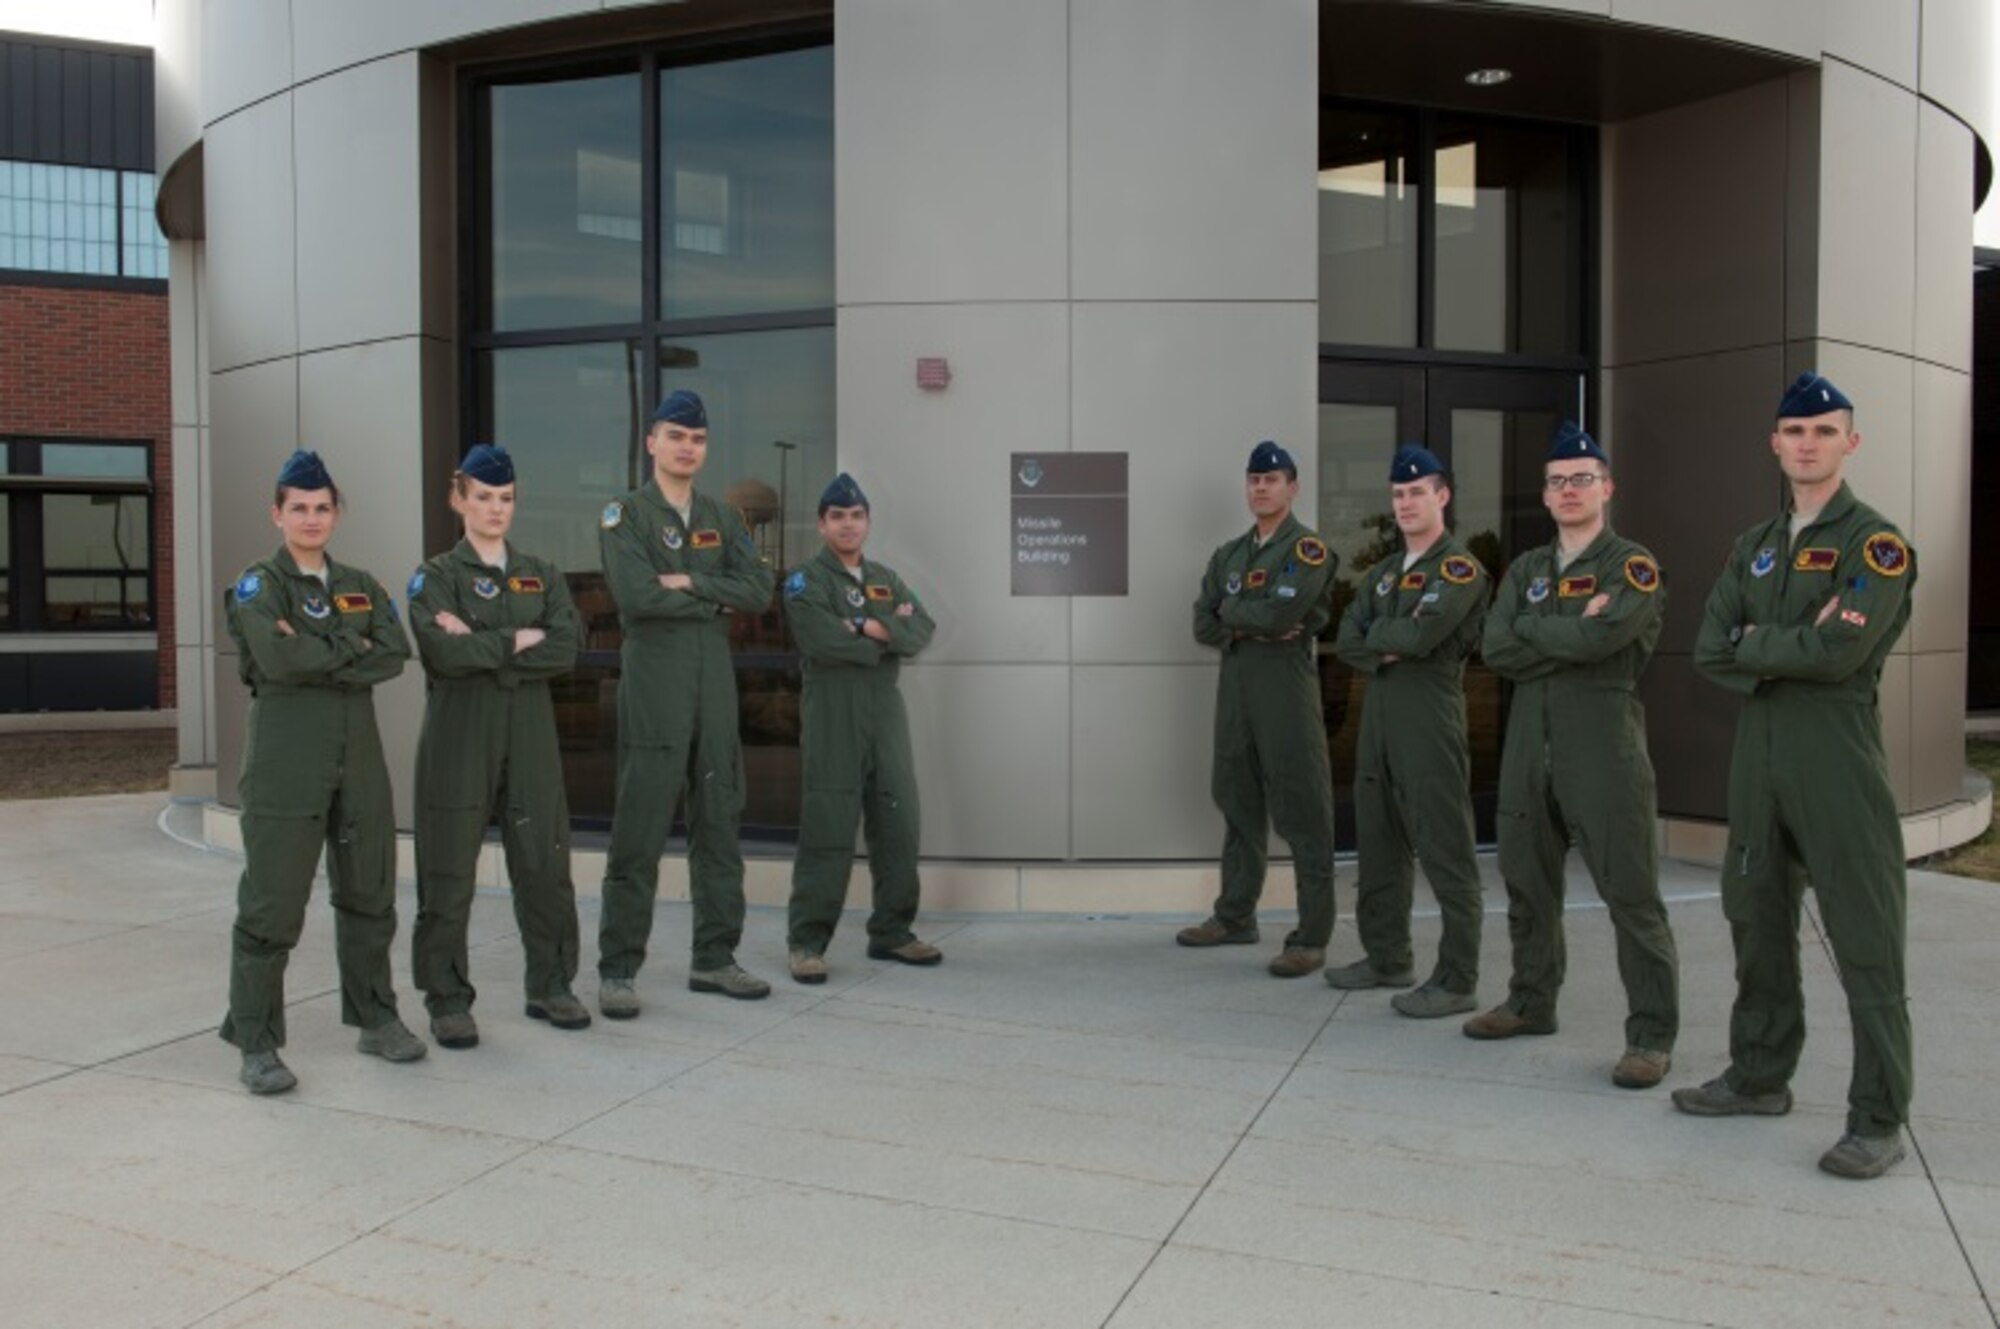 From left to right, 1st Lt. Morgan Emerson, 741st Missile Squadron deputy commander, 1st Lt. Emily Gill, 741st MS crew commander, 1st Lt. James Moore, 740th Missile Squadron backup crew commander, 2nd Lt. Jose Luis Talampas, 740th MS backup deputy crew commander, 1st Lt. Carlos Ruiz, 742nd Missile Squadron combat crew commander, 2nd Lt. Ben O’Neal, 742nd MS deputy crew commander, 2nd Lt. Robert Jager, 740th MS deputy crew commander, and 1st Lt. Mark Flaherty, 740th MS combat crew commander, stand in front of the Missile Operations building at Minot Air Force Base, N.D., Aug. 20, 2015. Minot’s 91st Operations Group Global Strike Challenge team currently holds the crown for best operations group in Air Force Global Strike Command following 2014 GSC. The team hopes to build off that momentum and learn from the few mistakes they made to do even better this year. (U.S. Air Force photo/Airman 1st Class Christian Sullivan)